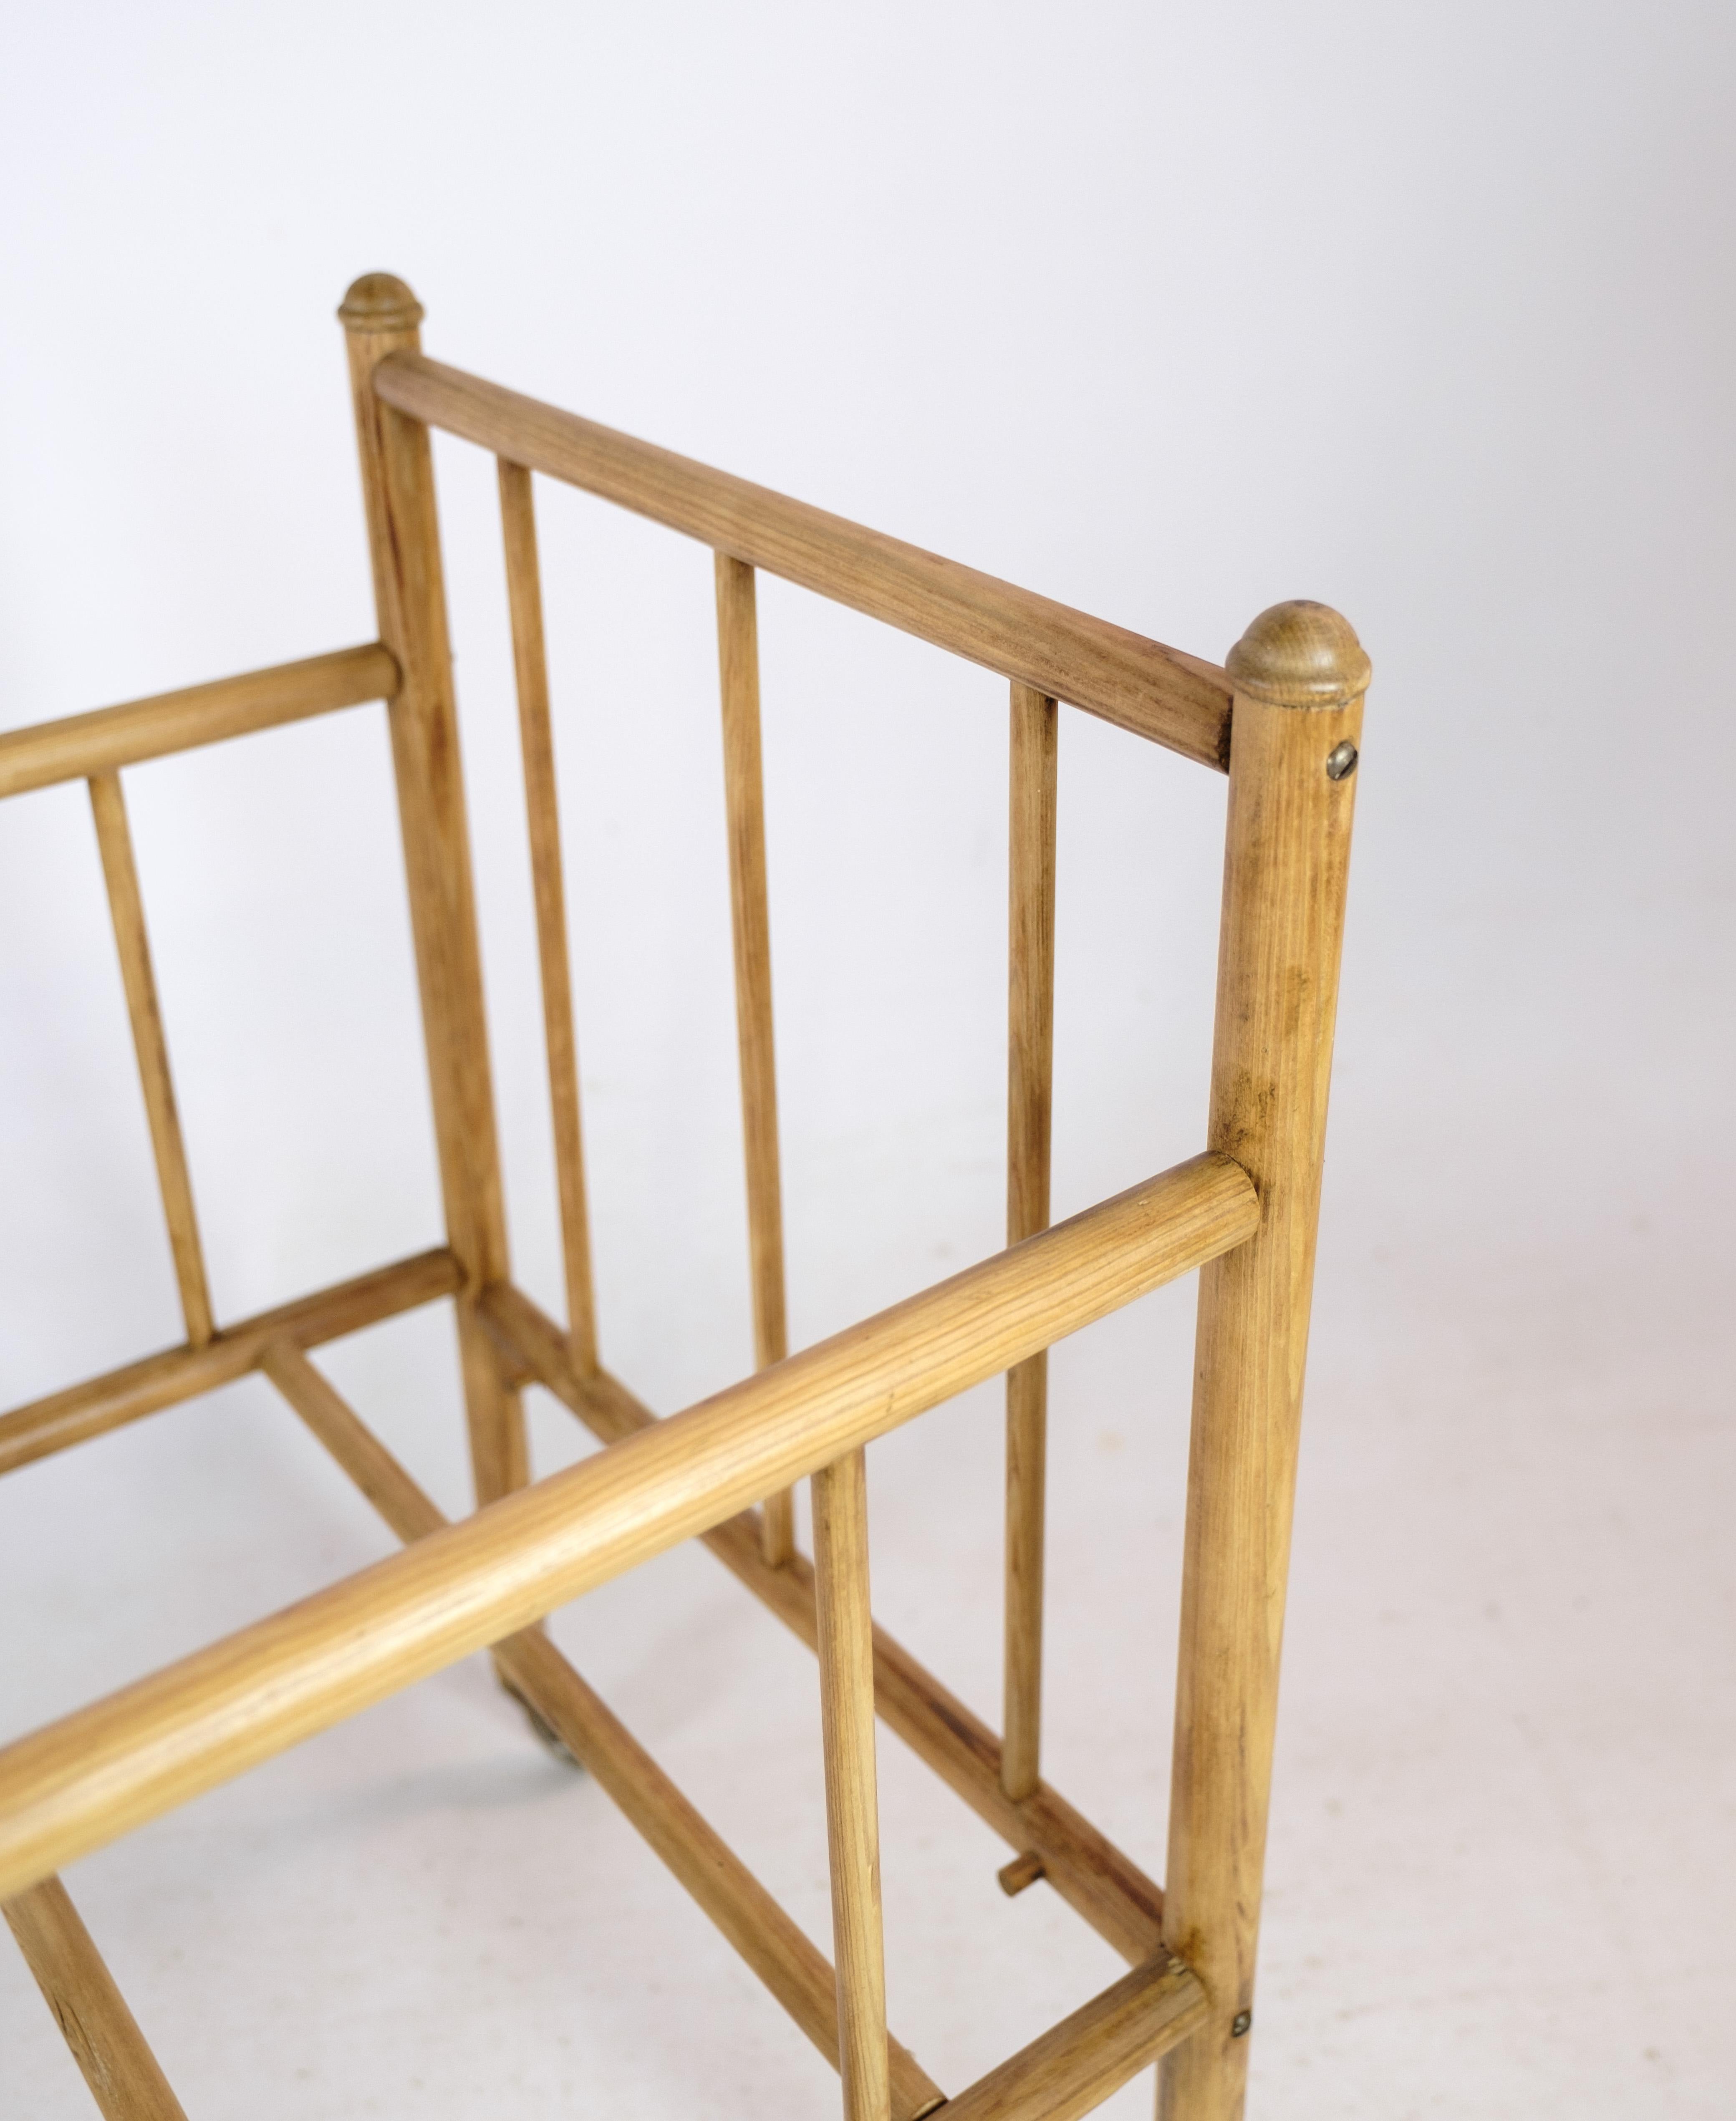 This antique crib, made from light pine wood and equipped with wheels for easy movement, offers a charming glimpse into the nursery furniture of the 1920s. While details about the designer and manufacturer are unavailable, the crib's timeless design